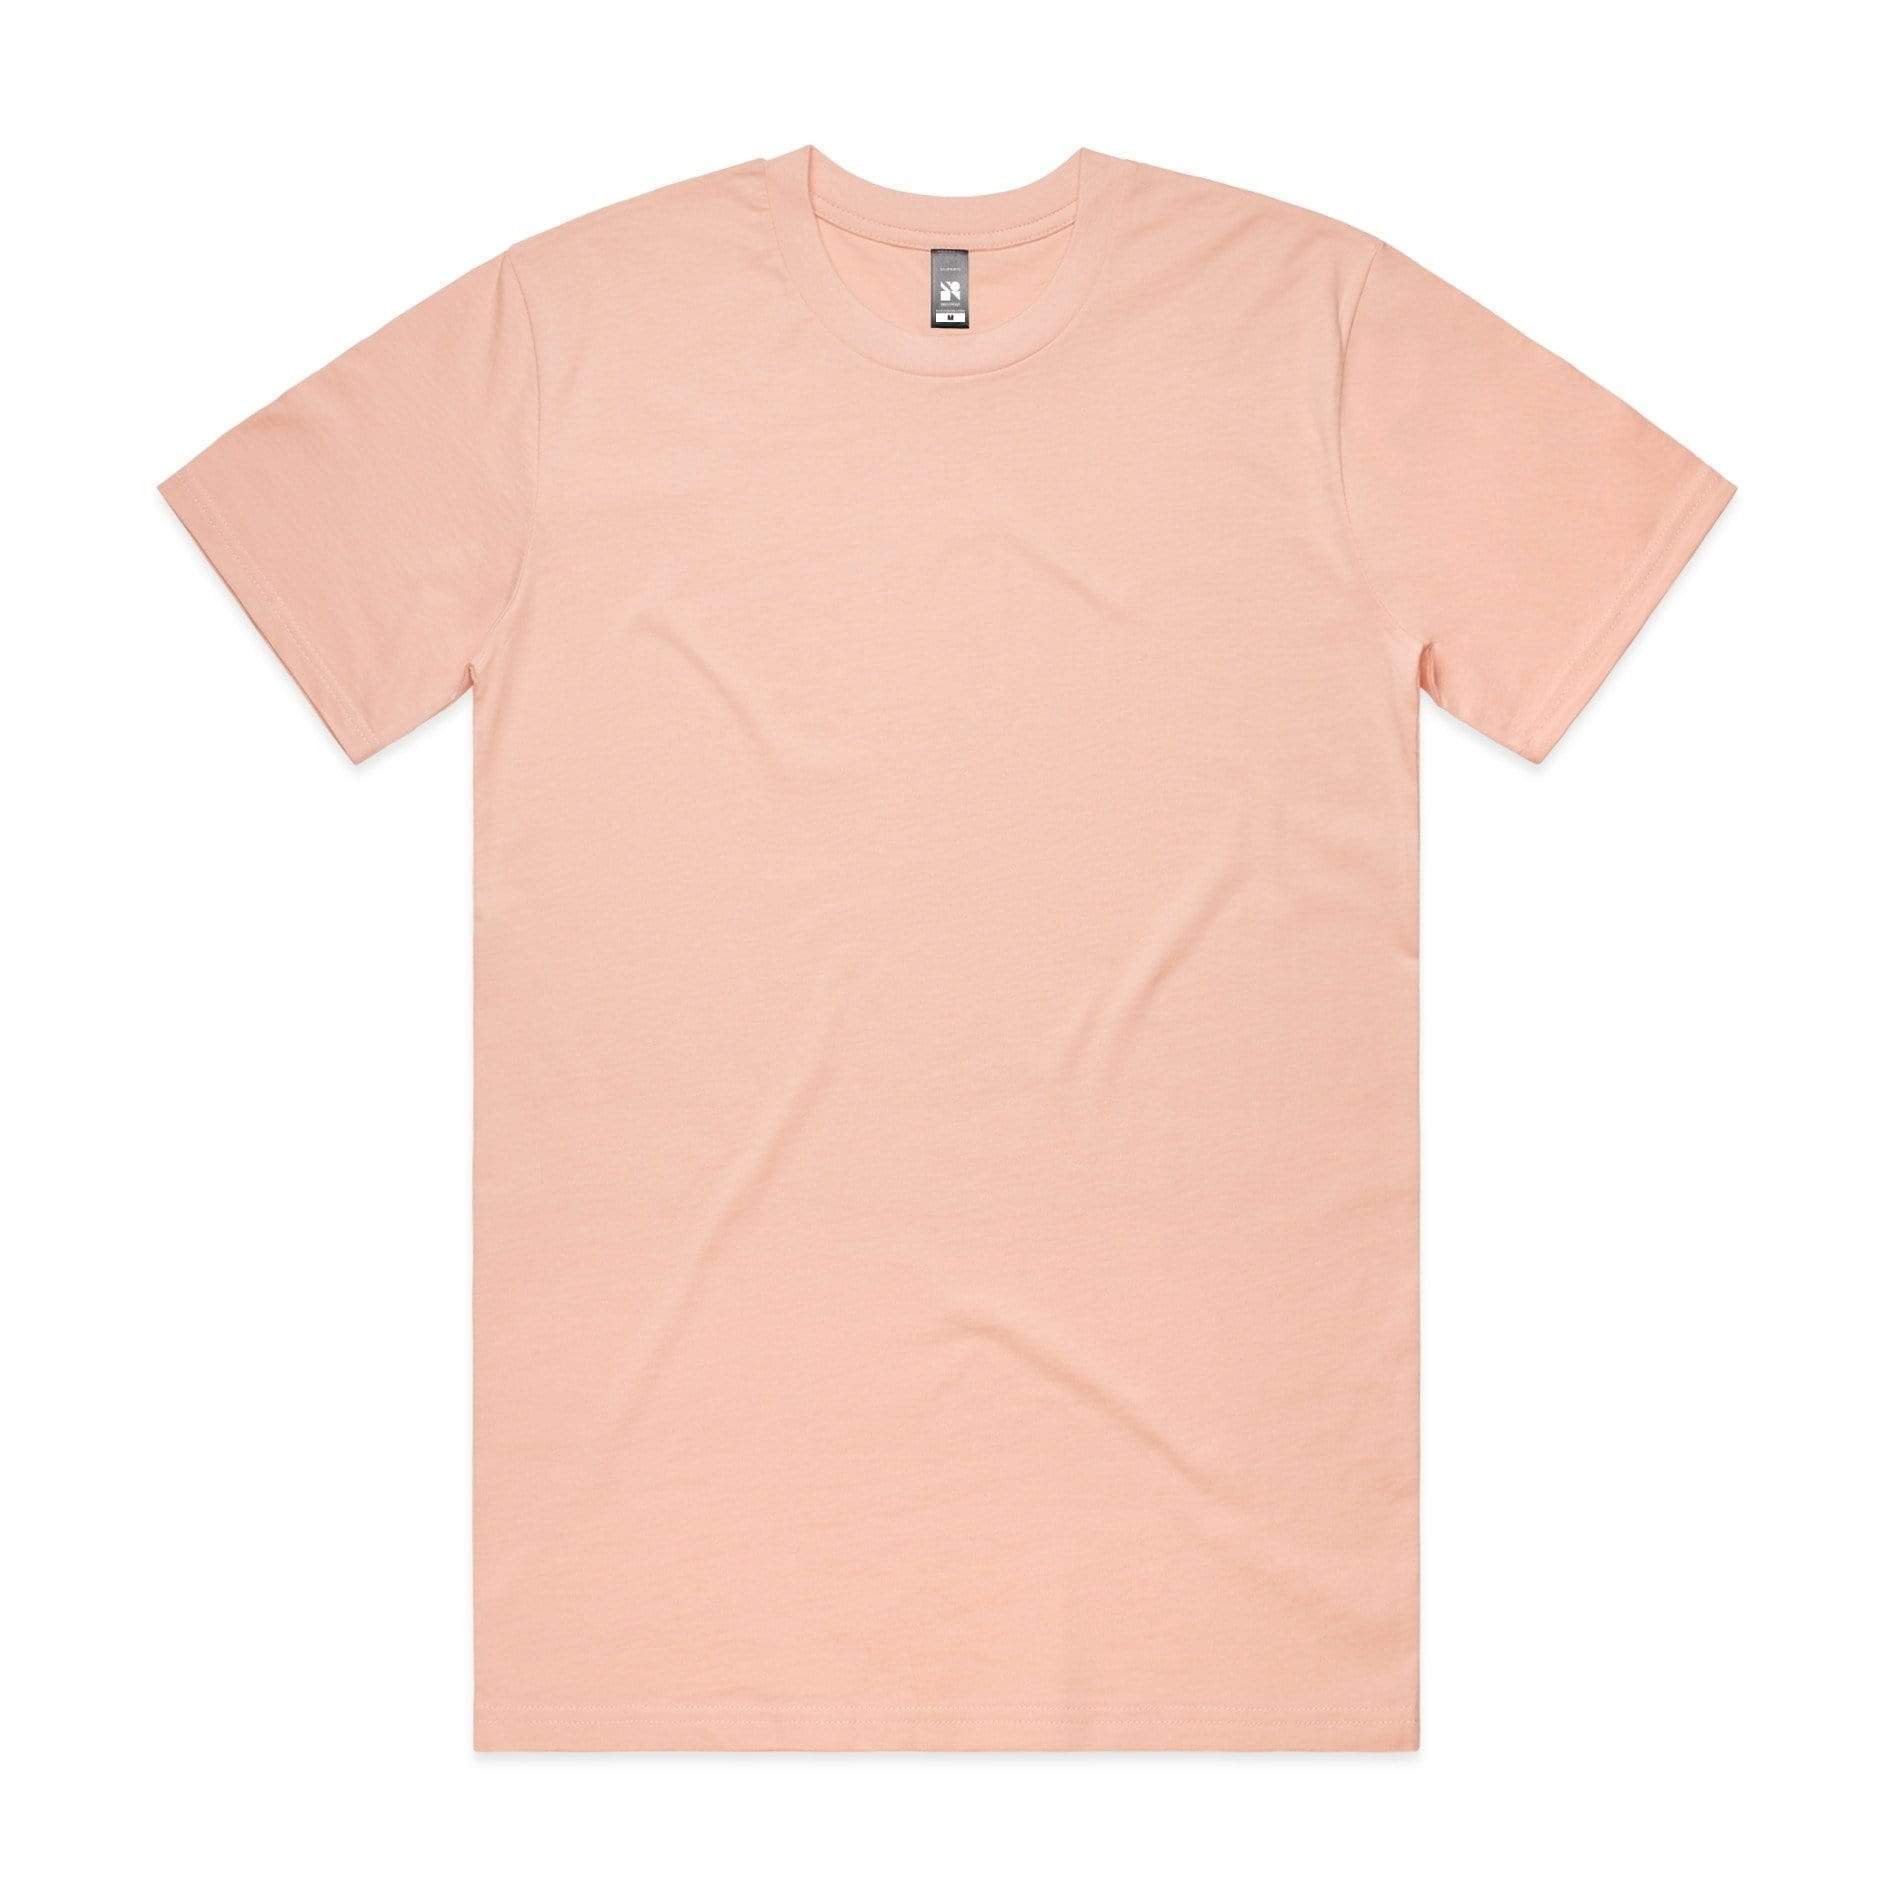 As Colour Men's classic tee 5026 Casual Wear As Colour PALE PINK SML 